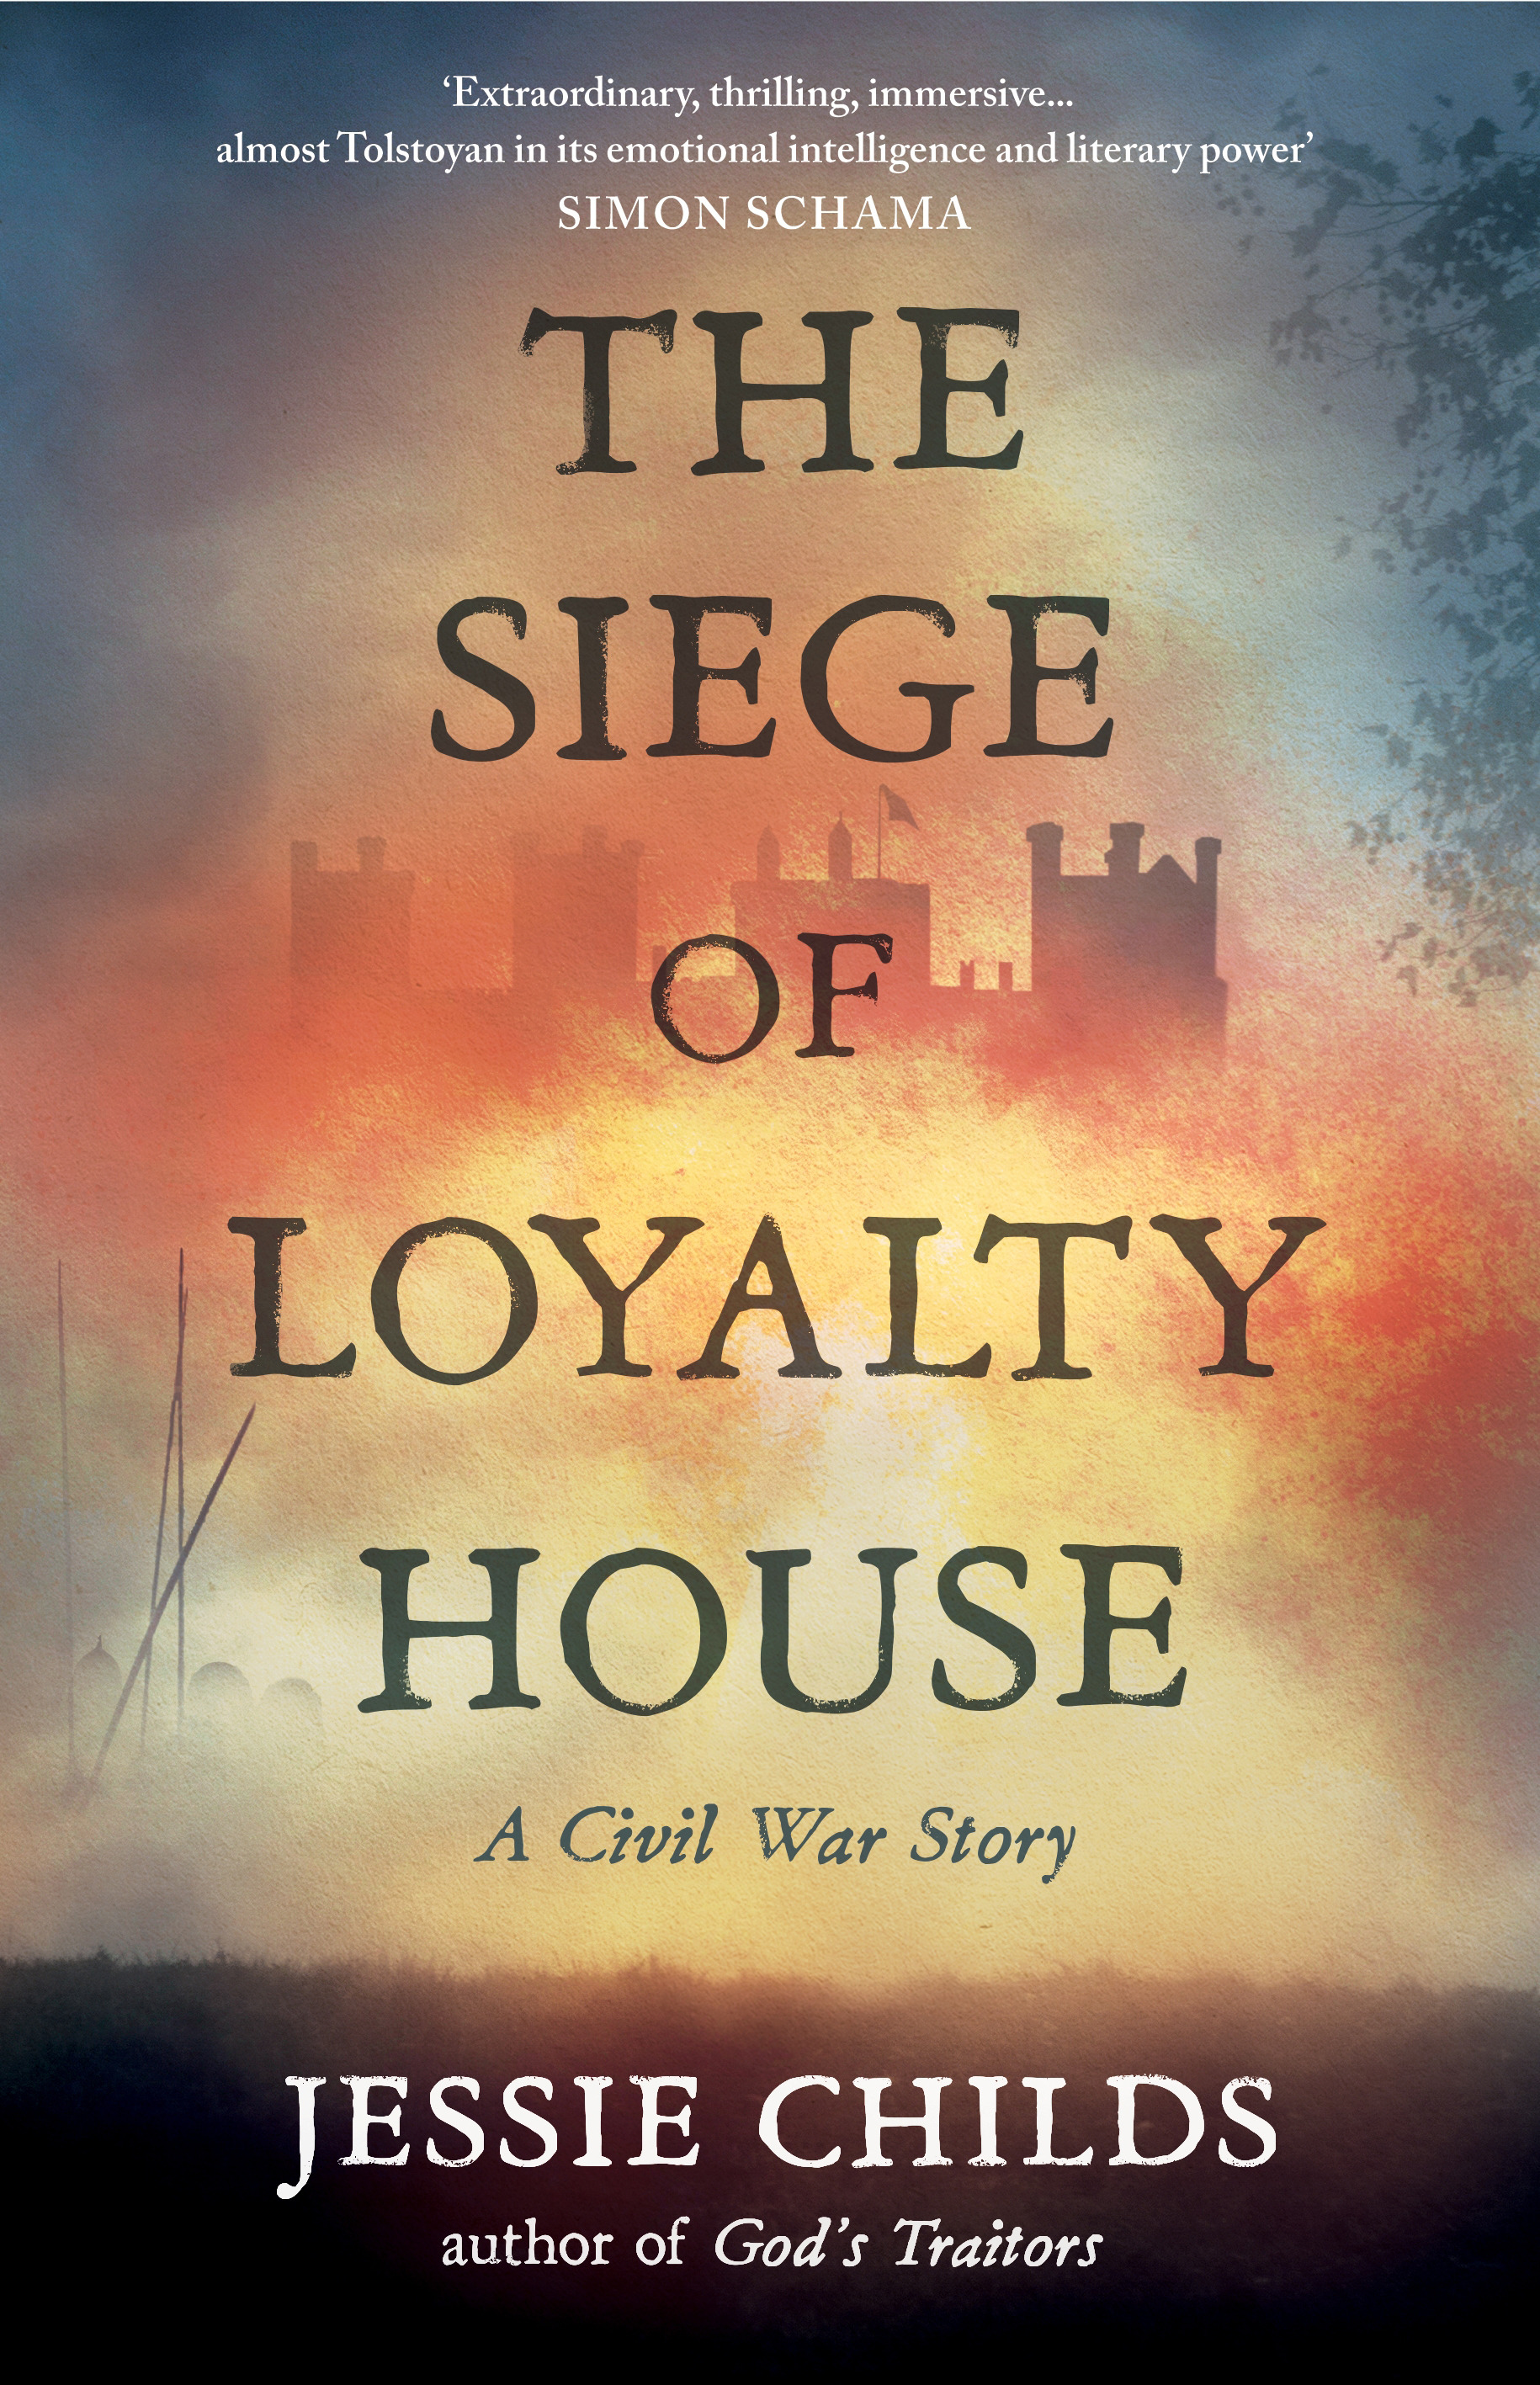 The Siege of Loyalty House : A new history of the English Civil War | Childs, Jessie (Auteur)